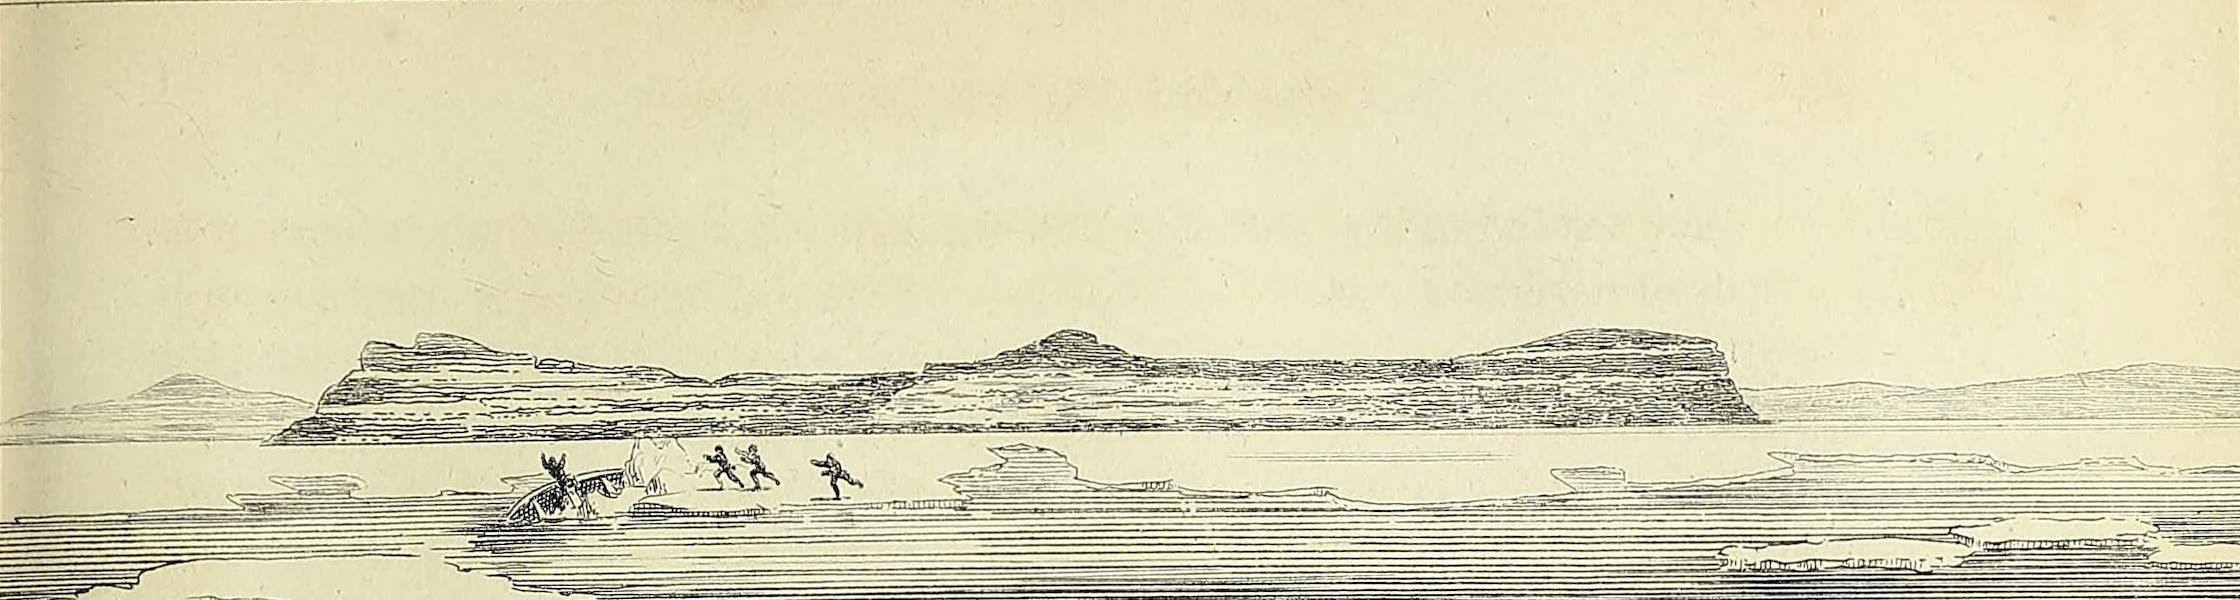 Journal of a Voyage for the Discovery of a North-West Passage - The Southernmost of Prince Leopold's Islands (1821)